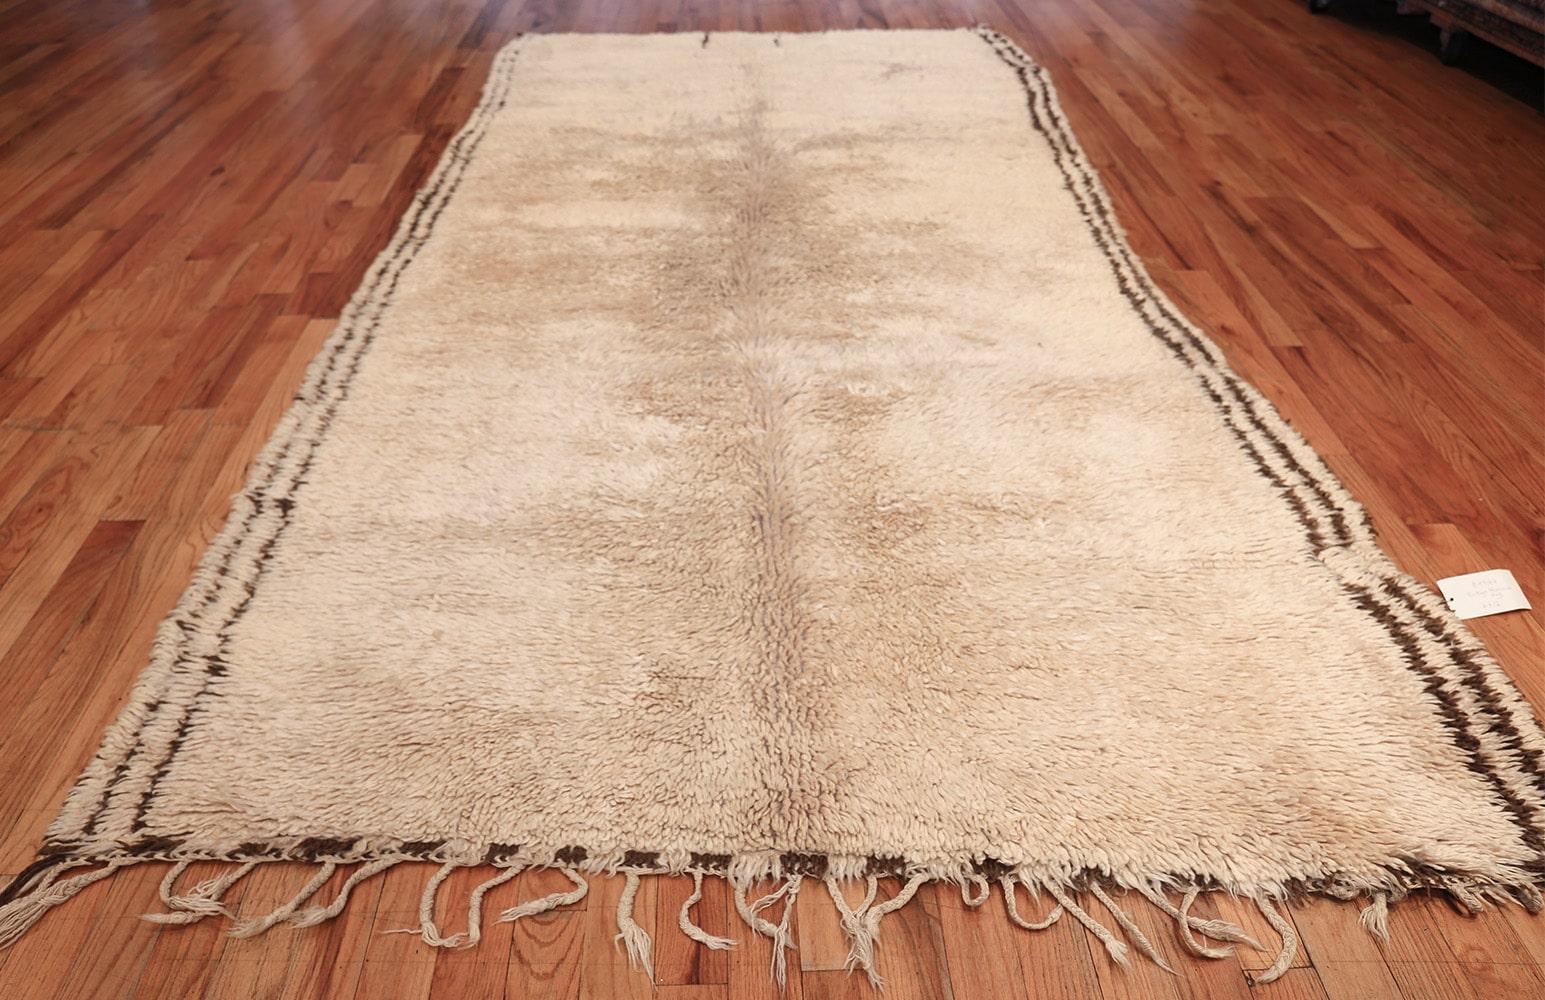 20th Century Vintage Moroccan Rug. Size: 6 ft x 12 ft (1.83 m x 3.66 m)